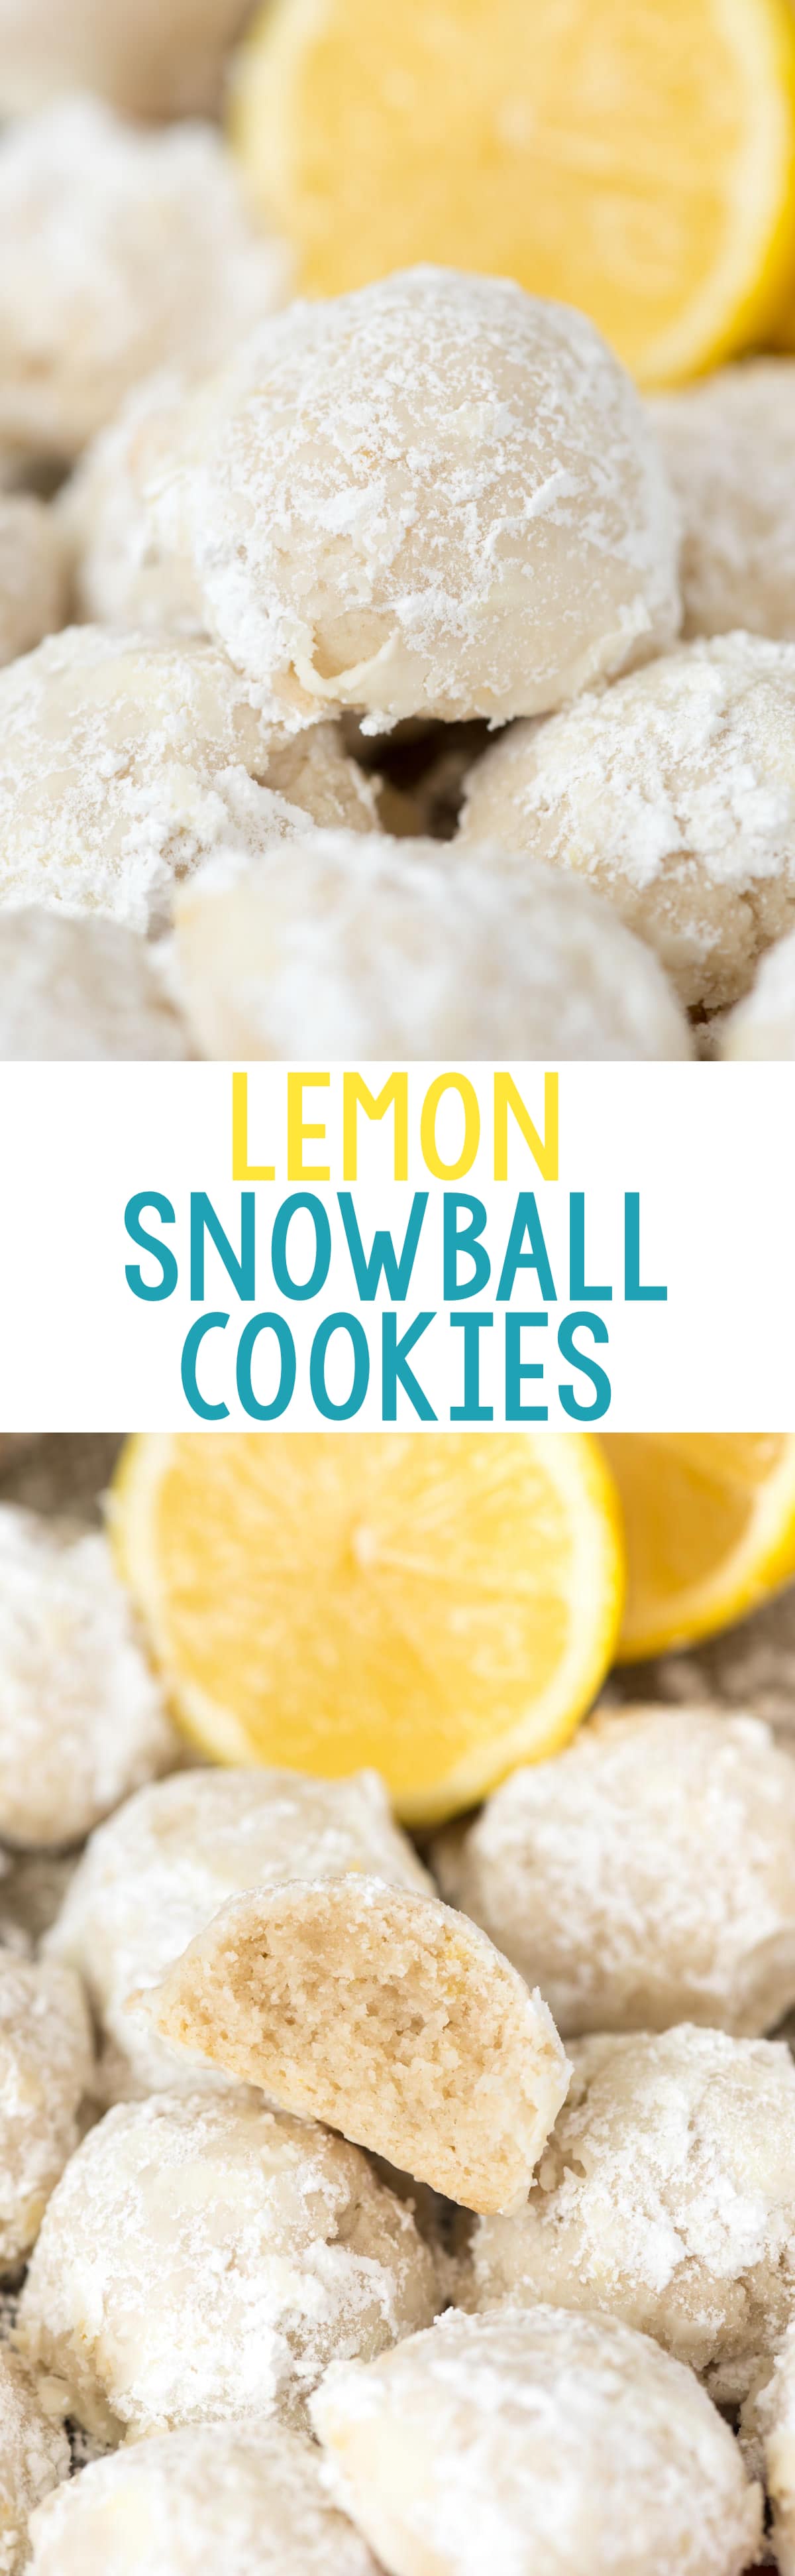 EASY Lemon Snowball Cookies - this is my favorite wedding cookie recipe! Add lemon zest, juice, and extract to your favorite tea cakes to make the perfect lemon cookie.